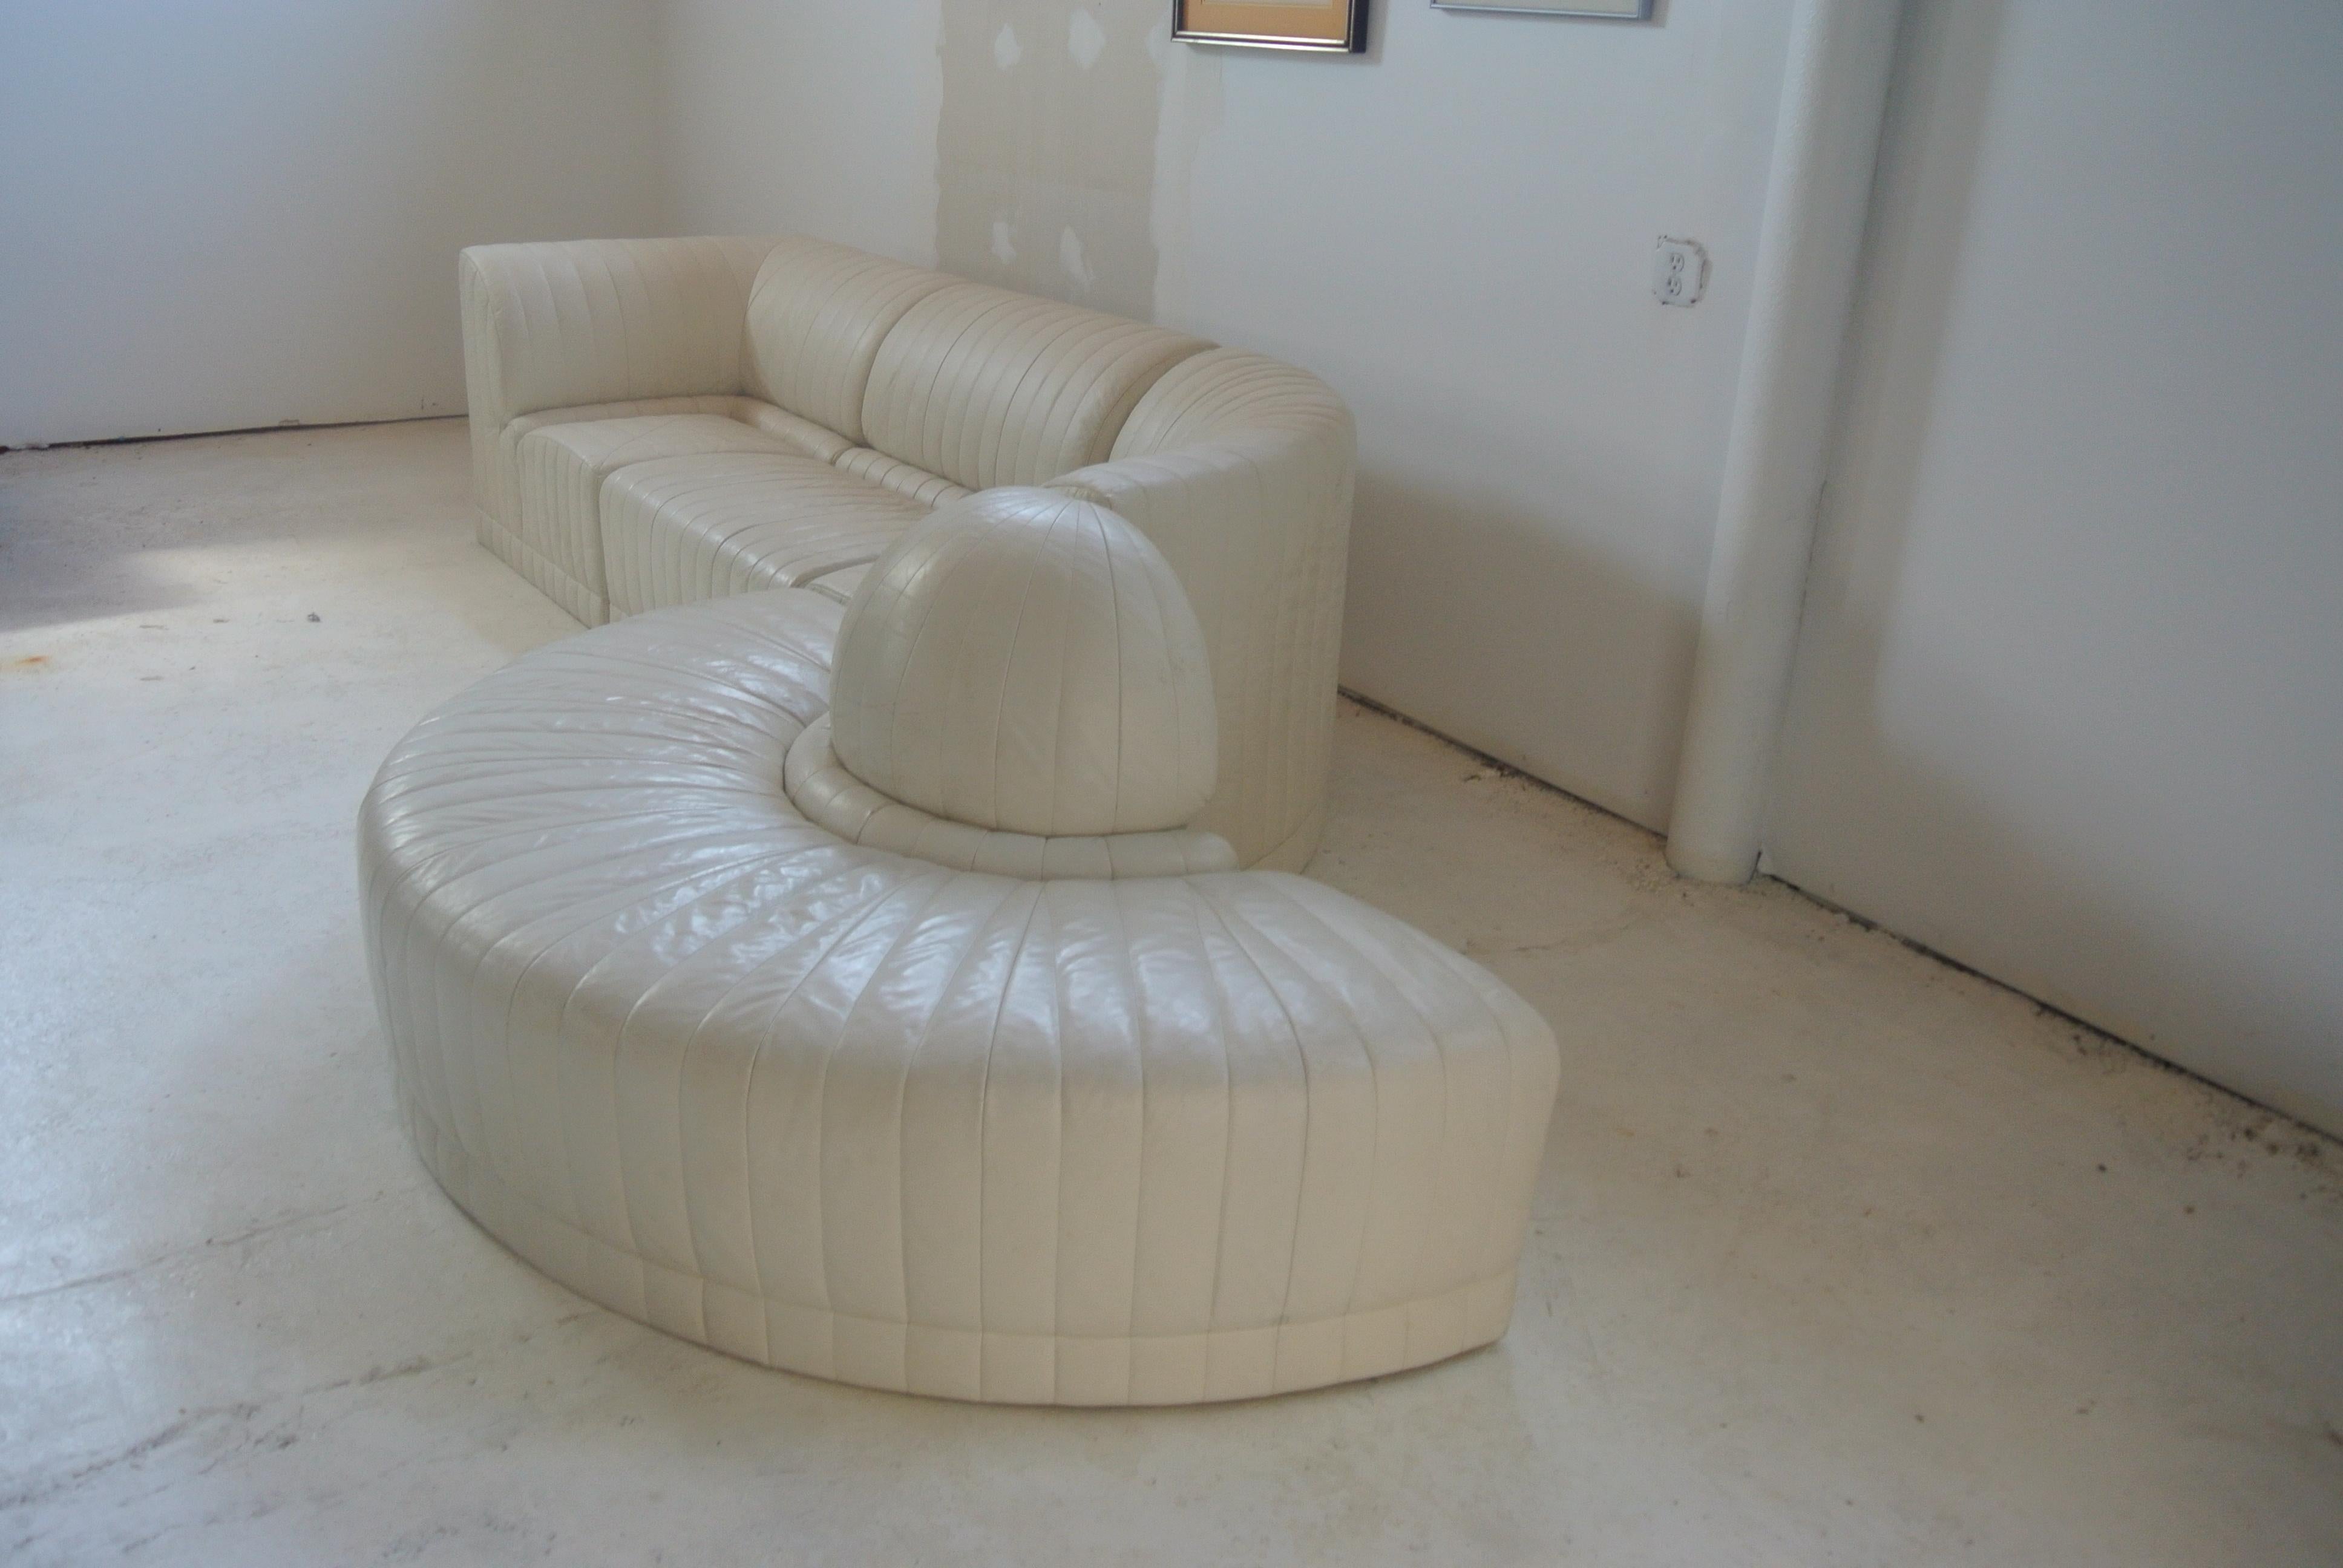 Roche Bobois Sectional In Good Condition For Sale In Morristown, NJ